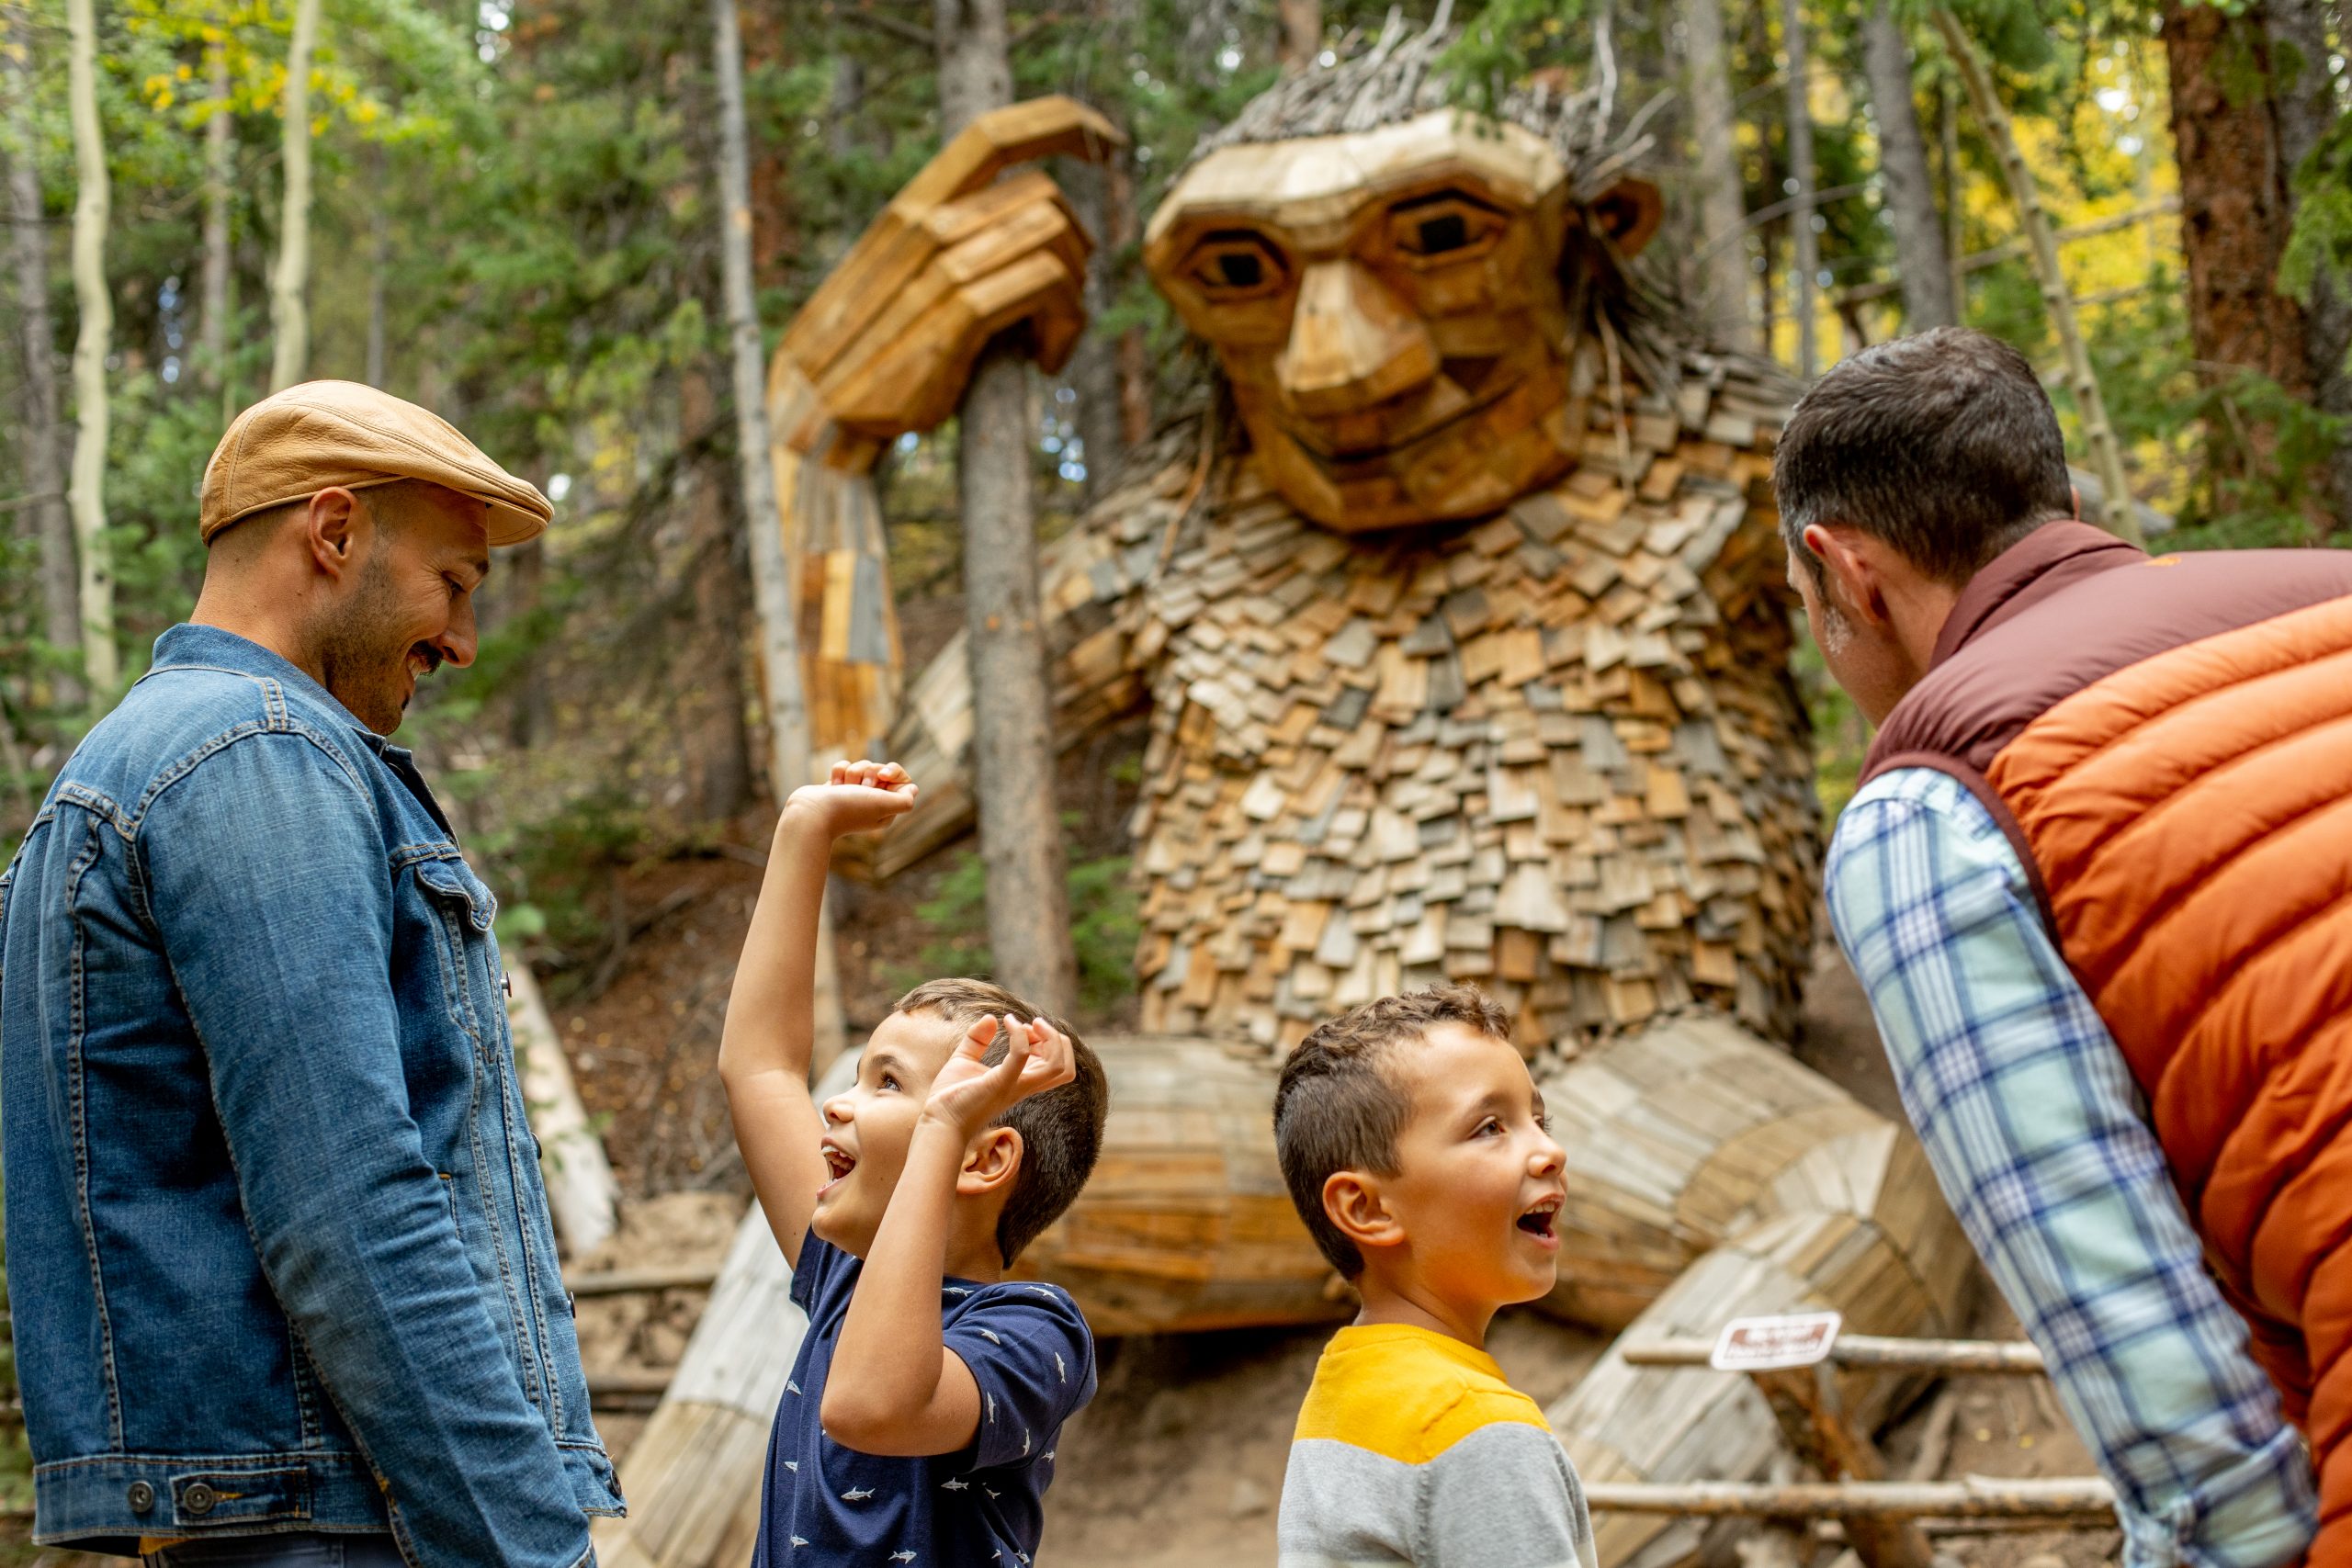 A family visits Isak Hartstone, a larger-than life troll made out of natural materials who lives in the forest just outside of Breckenridge.